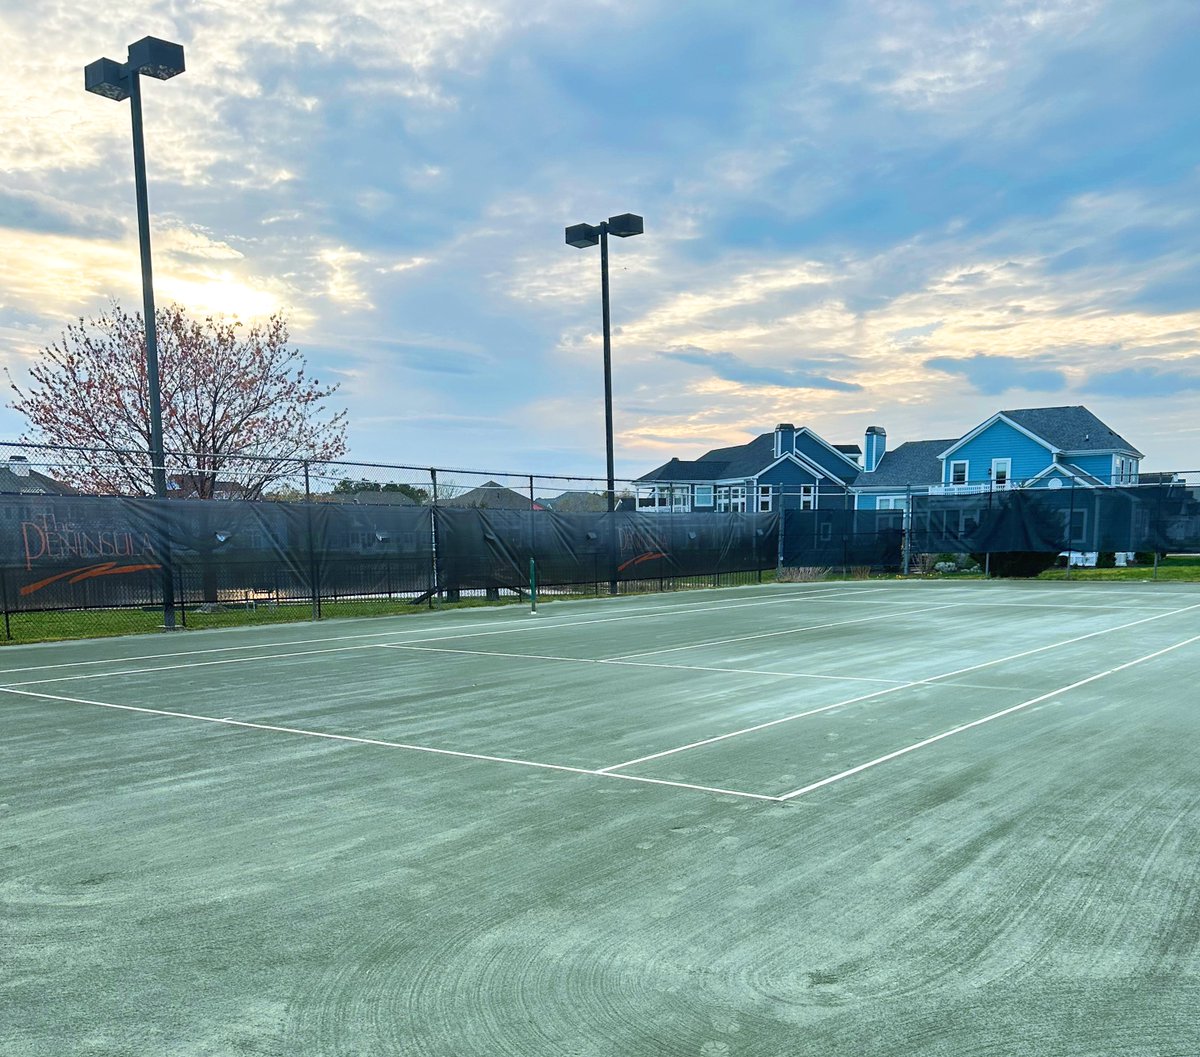 We're thrilled to announce that our project to revamp The Peninsula Golf and Country Club tennis courts in Millsboro, DE is officially complete! Say hello to their newly upgraded courts featuring Har-Tru surfacing. 
#KSC #Keystone #EngineeredForPerformance #Hartru #Tennis